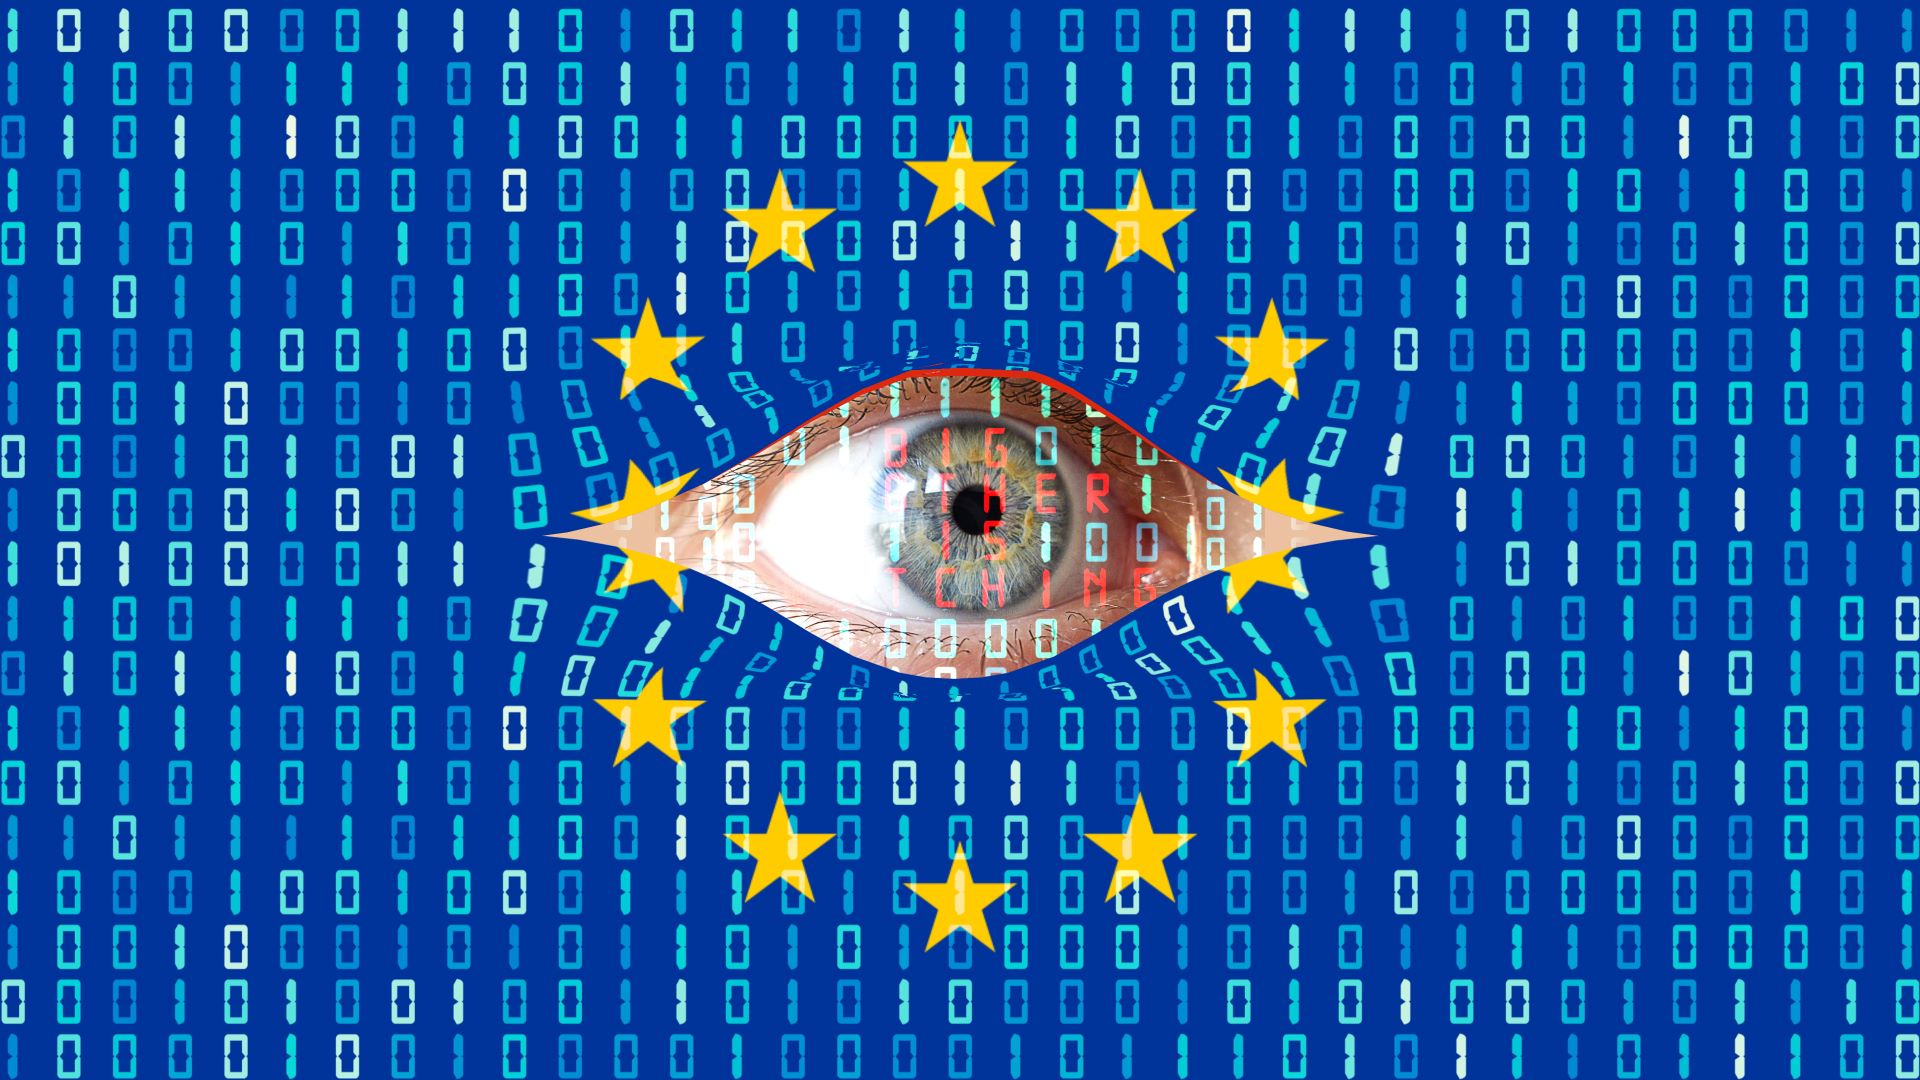 eu-anti-encryption-crusaders-seek-to-turn-your-digital-devices-into-spyware